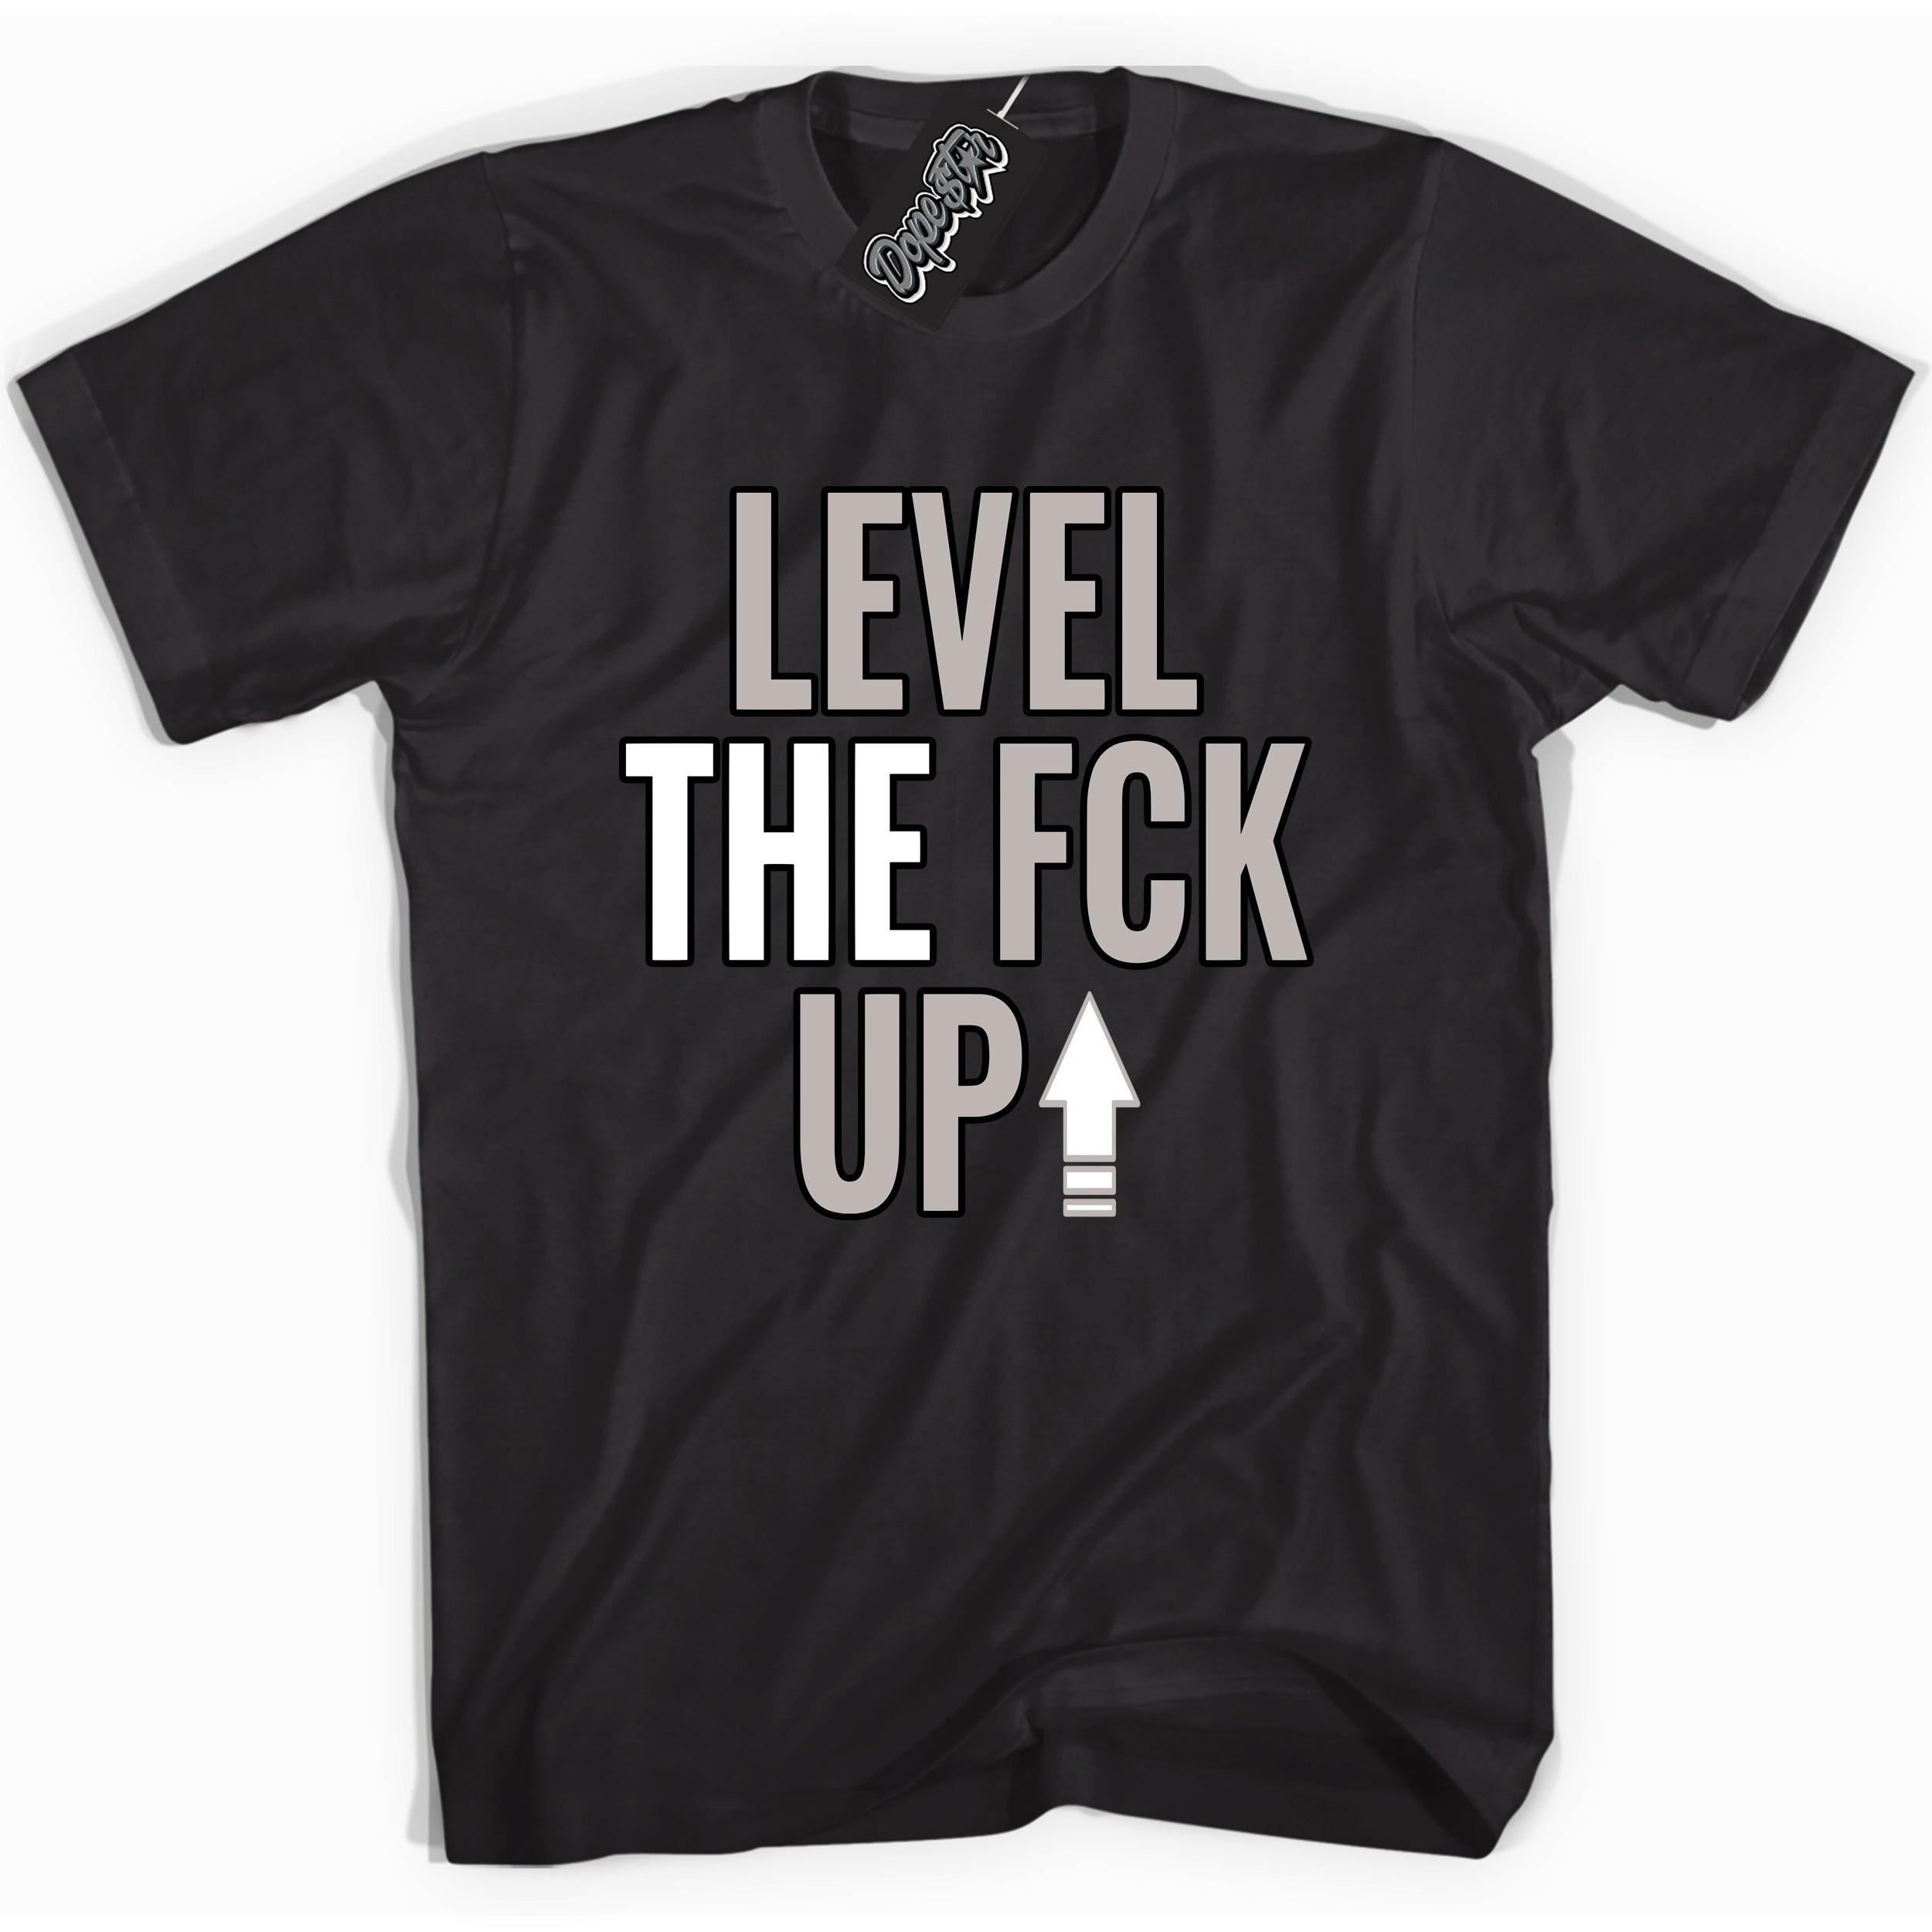 Cool Black Shirt With Level Up design That Perfectly Matches AIR JORDAN 4 RETRO MILITARY BLACK Sneakers.